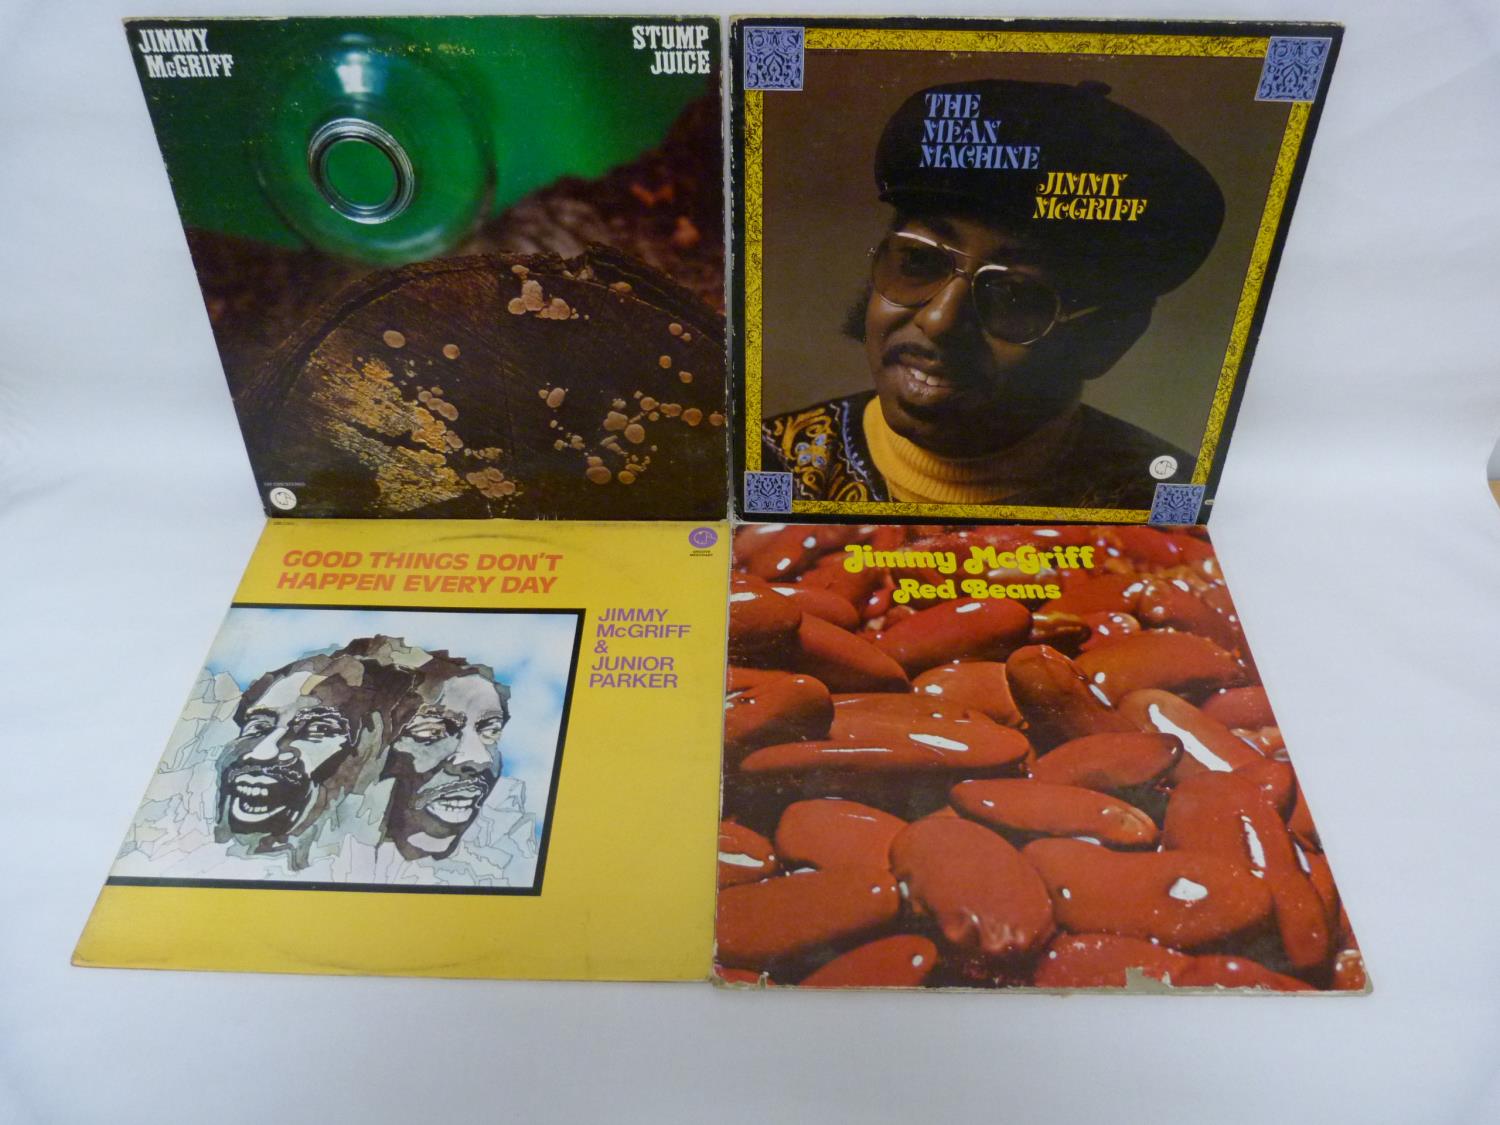 4 x LPs by Jimmy McGriff to include The Mean Machine, Red Beans and Stump Juice. All US pressings on